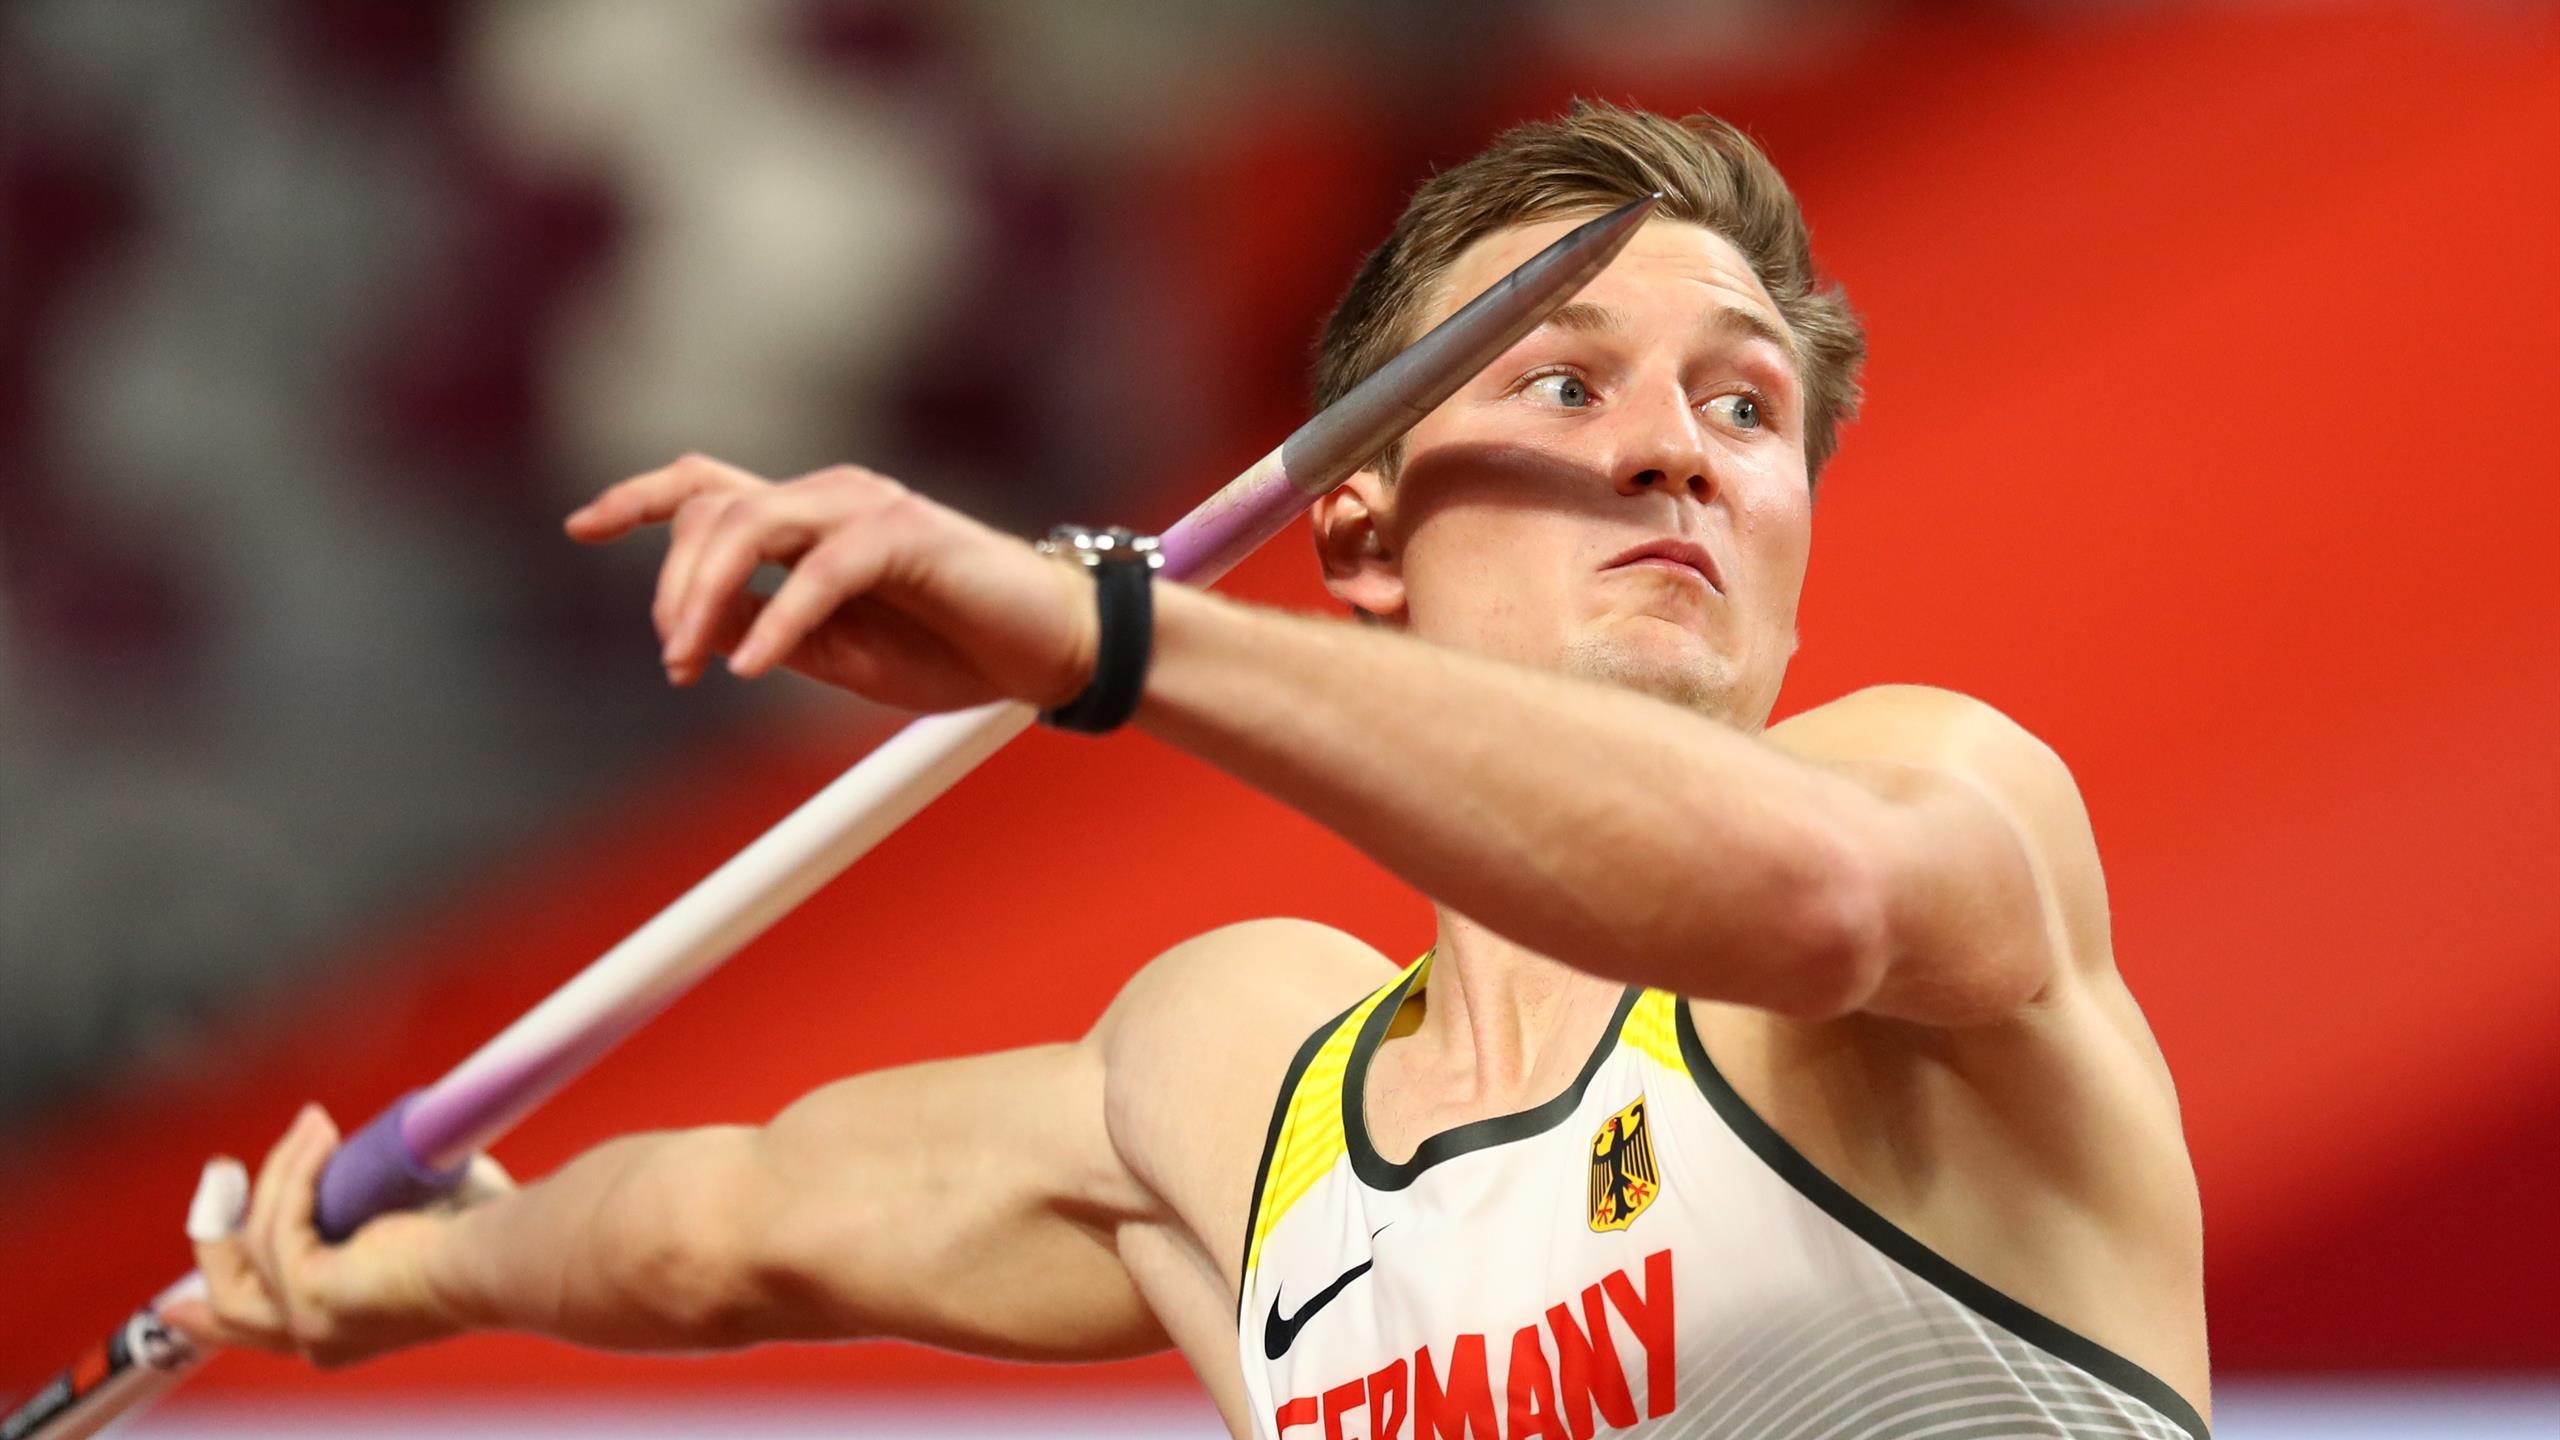 Javelin Throw: Team Germany, A track and field event where a spear is tossed, Thomas Rohler. 2560x1440 HD Wallpaper.